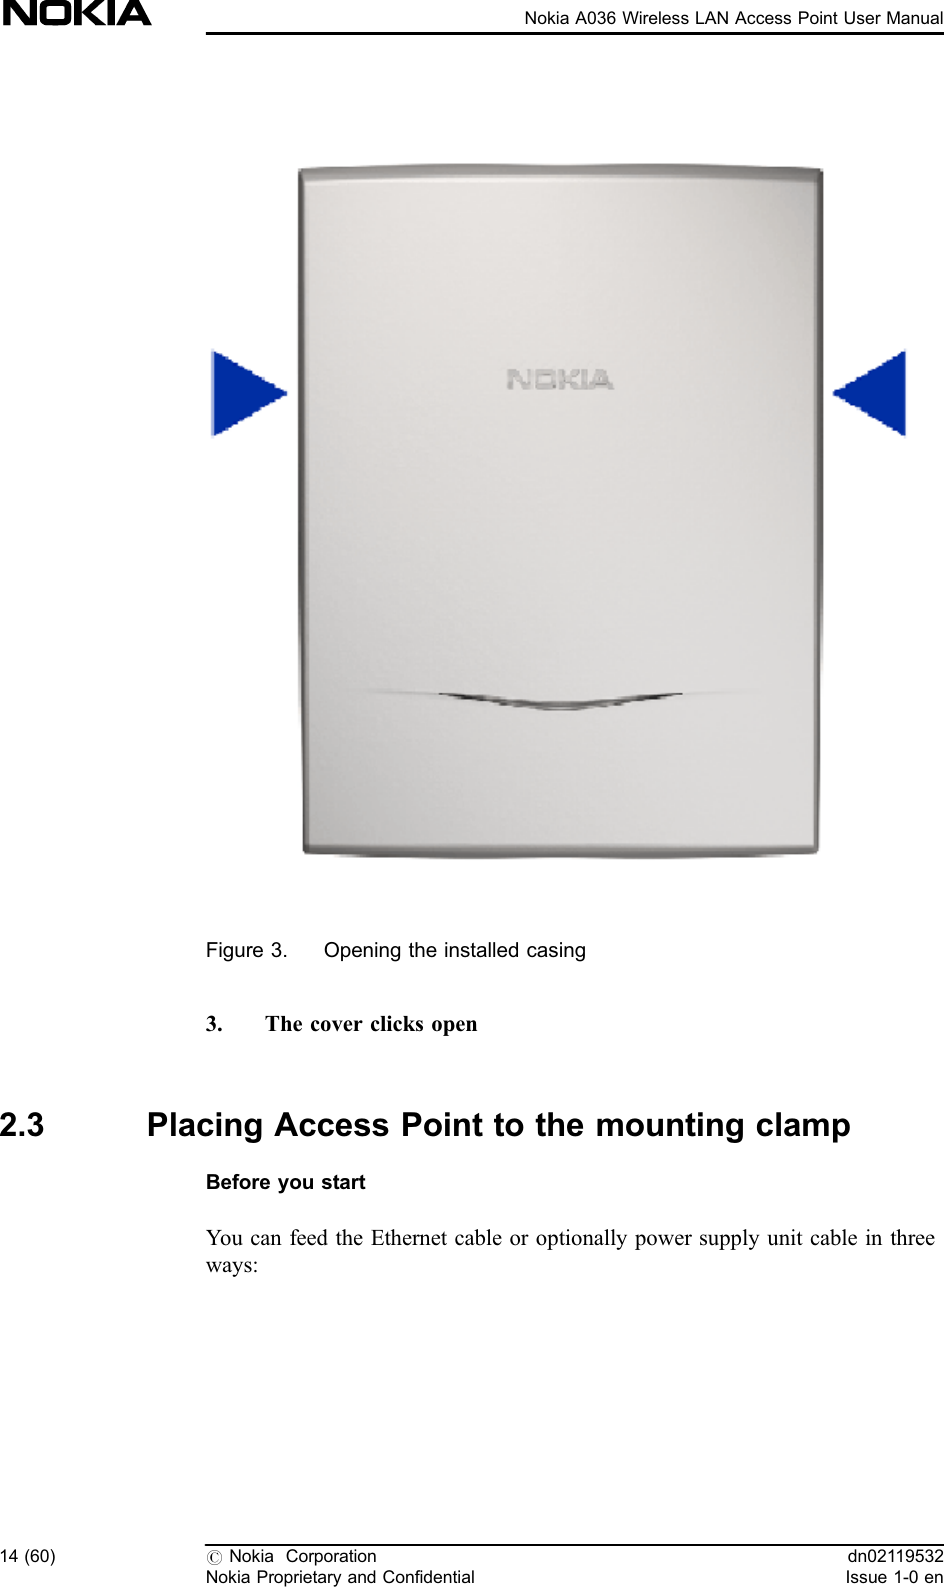 Figure 3. Opening the installed casing3. The cover clicks open2.3 Placing Access Point to the mounting clampBefore you startYou can feed the Ethernet cable or optionally power supply unit cable in threeways:14 (60) #Nokia CorporationNokia Proprietary and Confidentialdn02119532Issue 1-0 enNokia A036 Wireless LAN Access Point User Manual